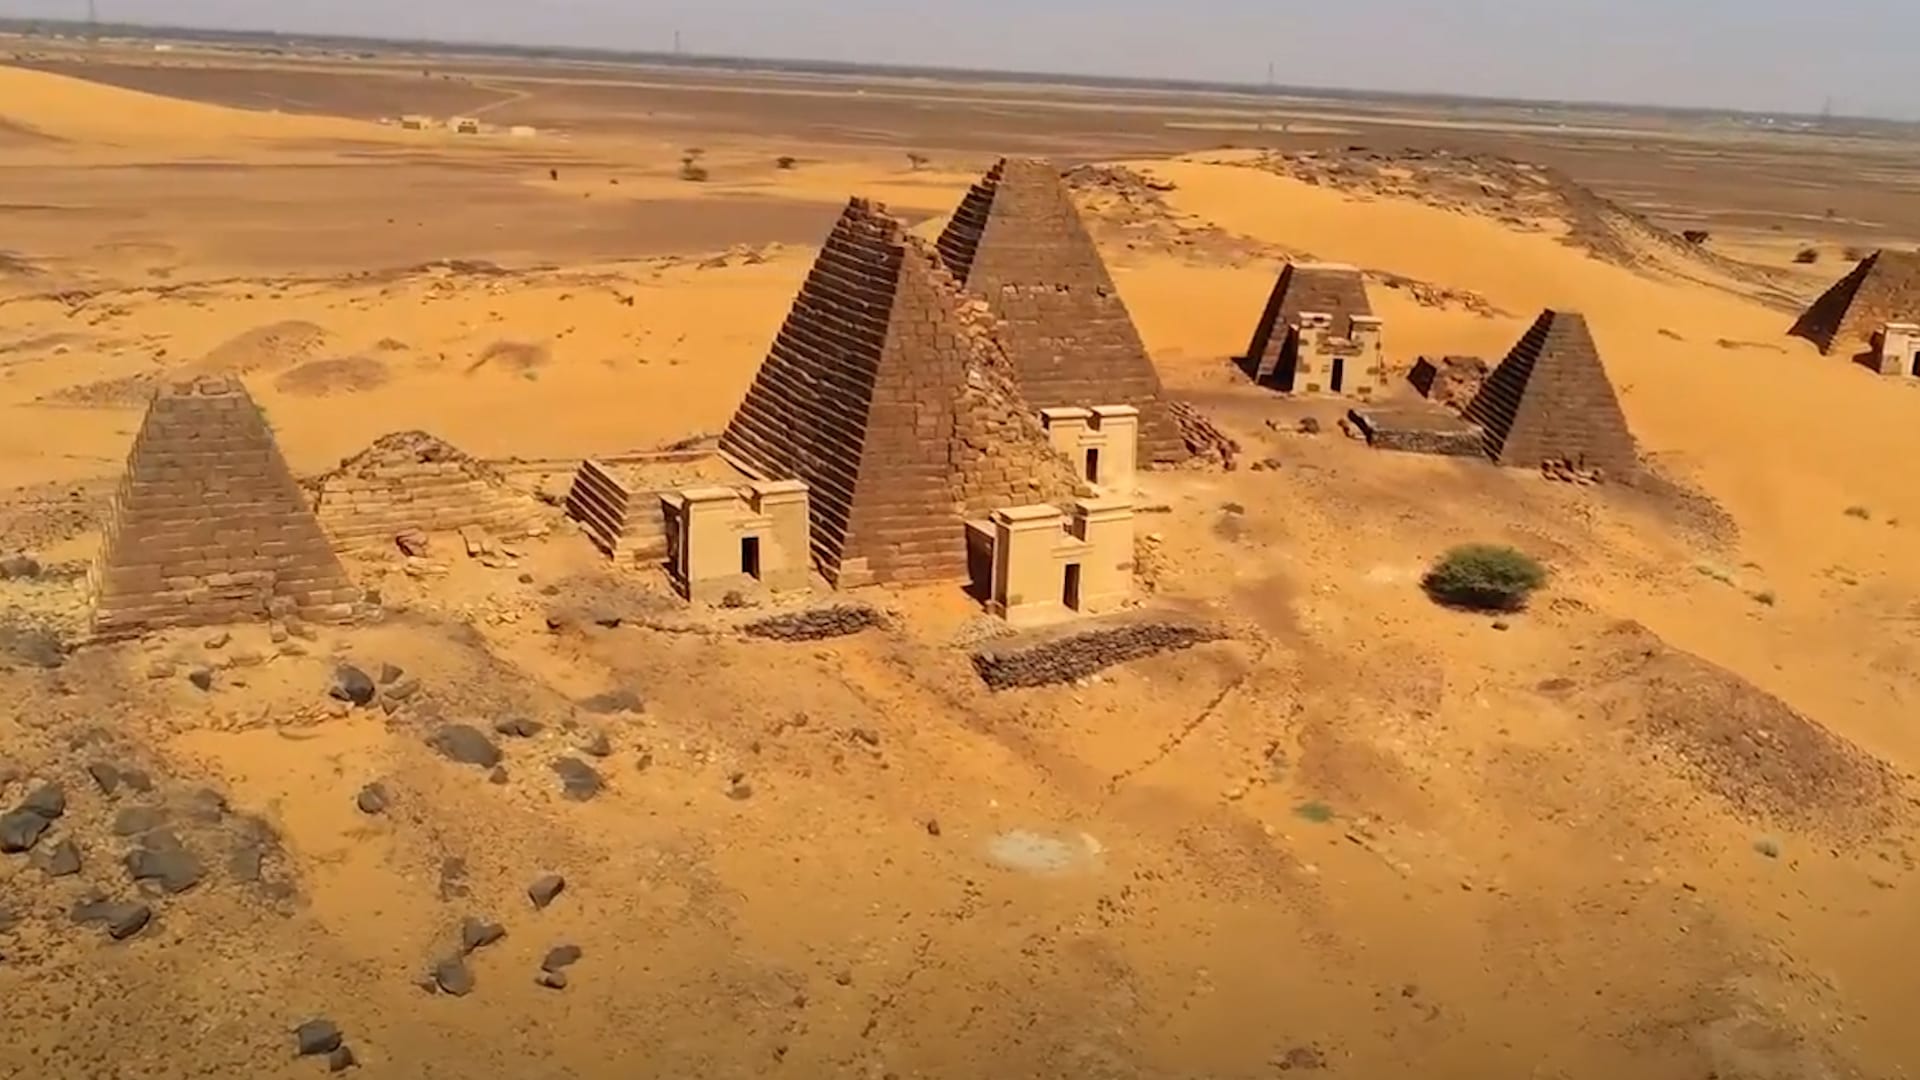 The magnificent pyramids of Meroe